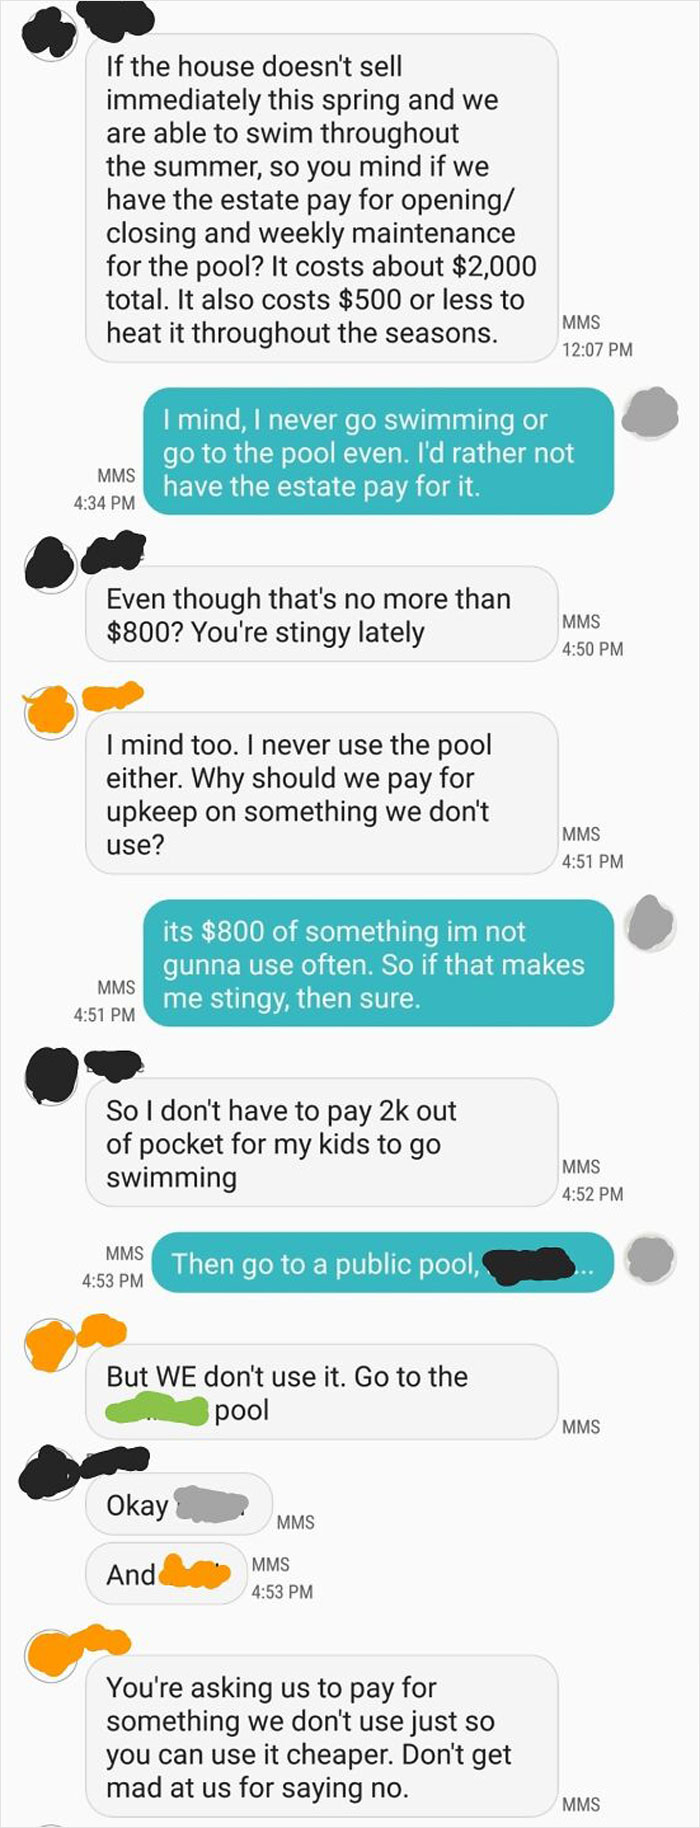 My Sister Wants Me And My Brother To Help Pay For Her And Her Kids To Swim At My Late Father's Pool